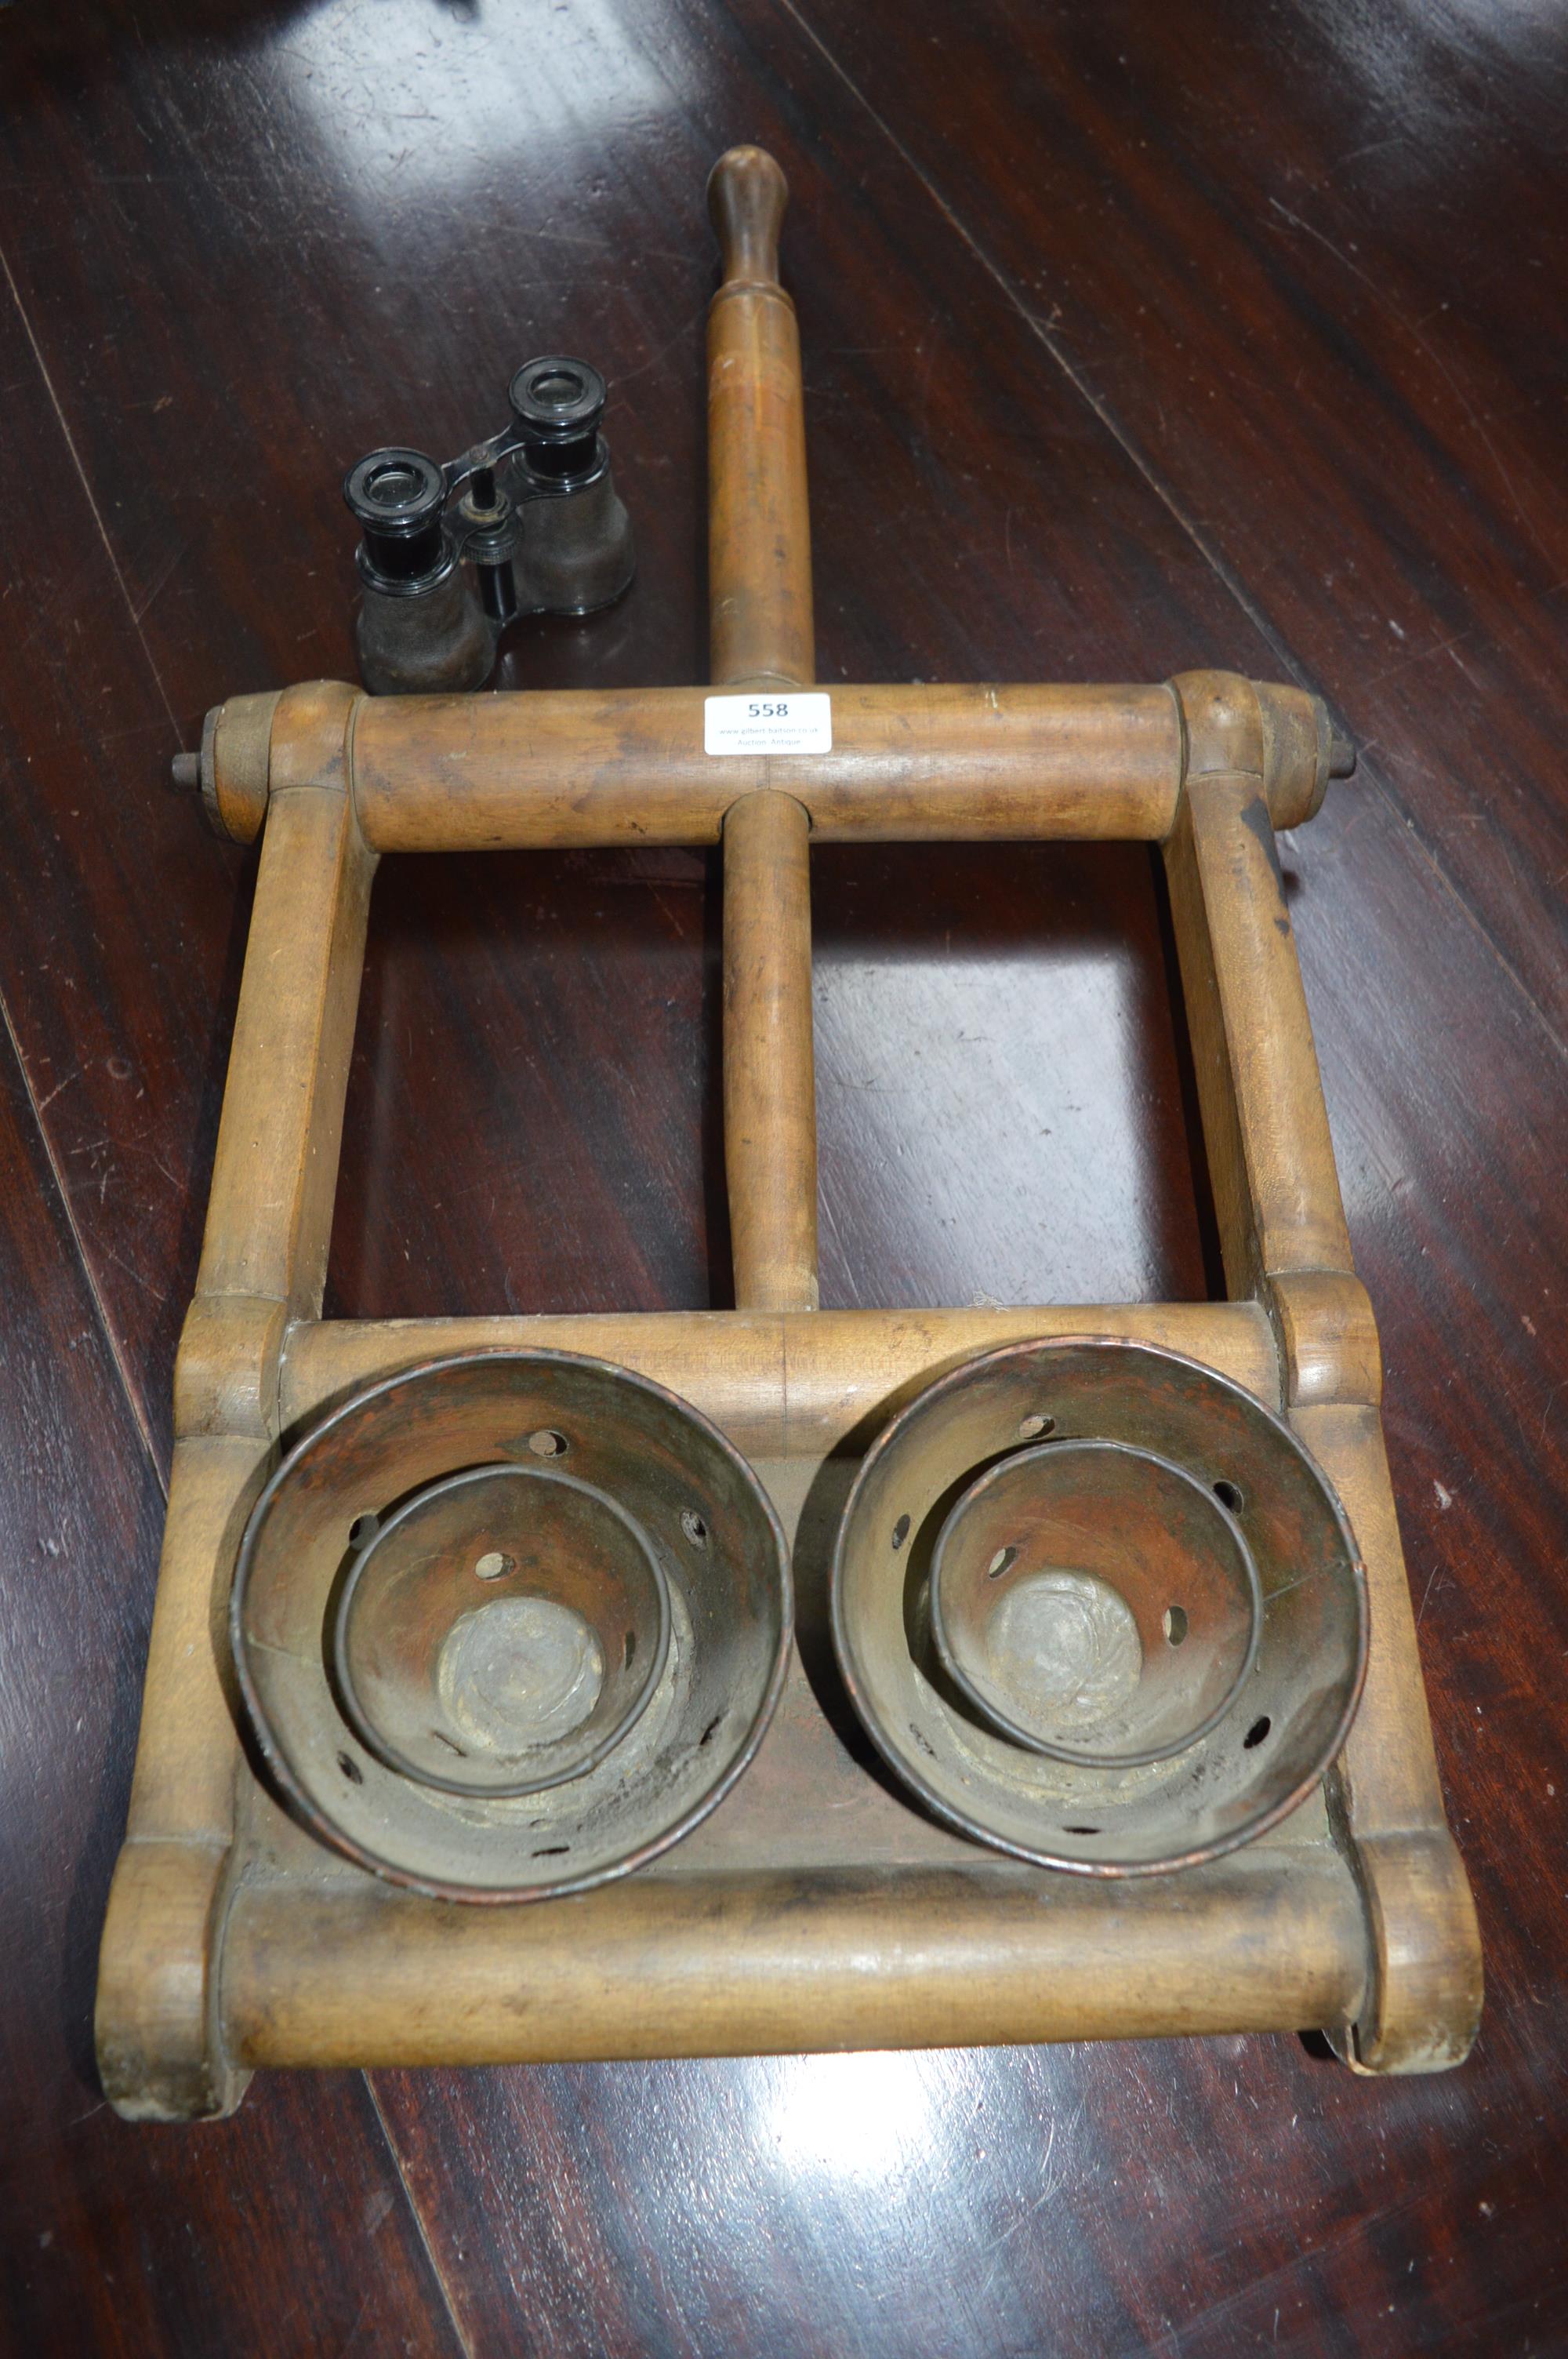 Mechanical Part of a Victorian Washing Machine and a Pair of Binoculars